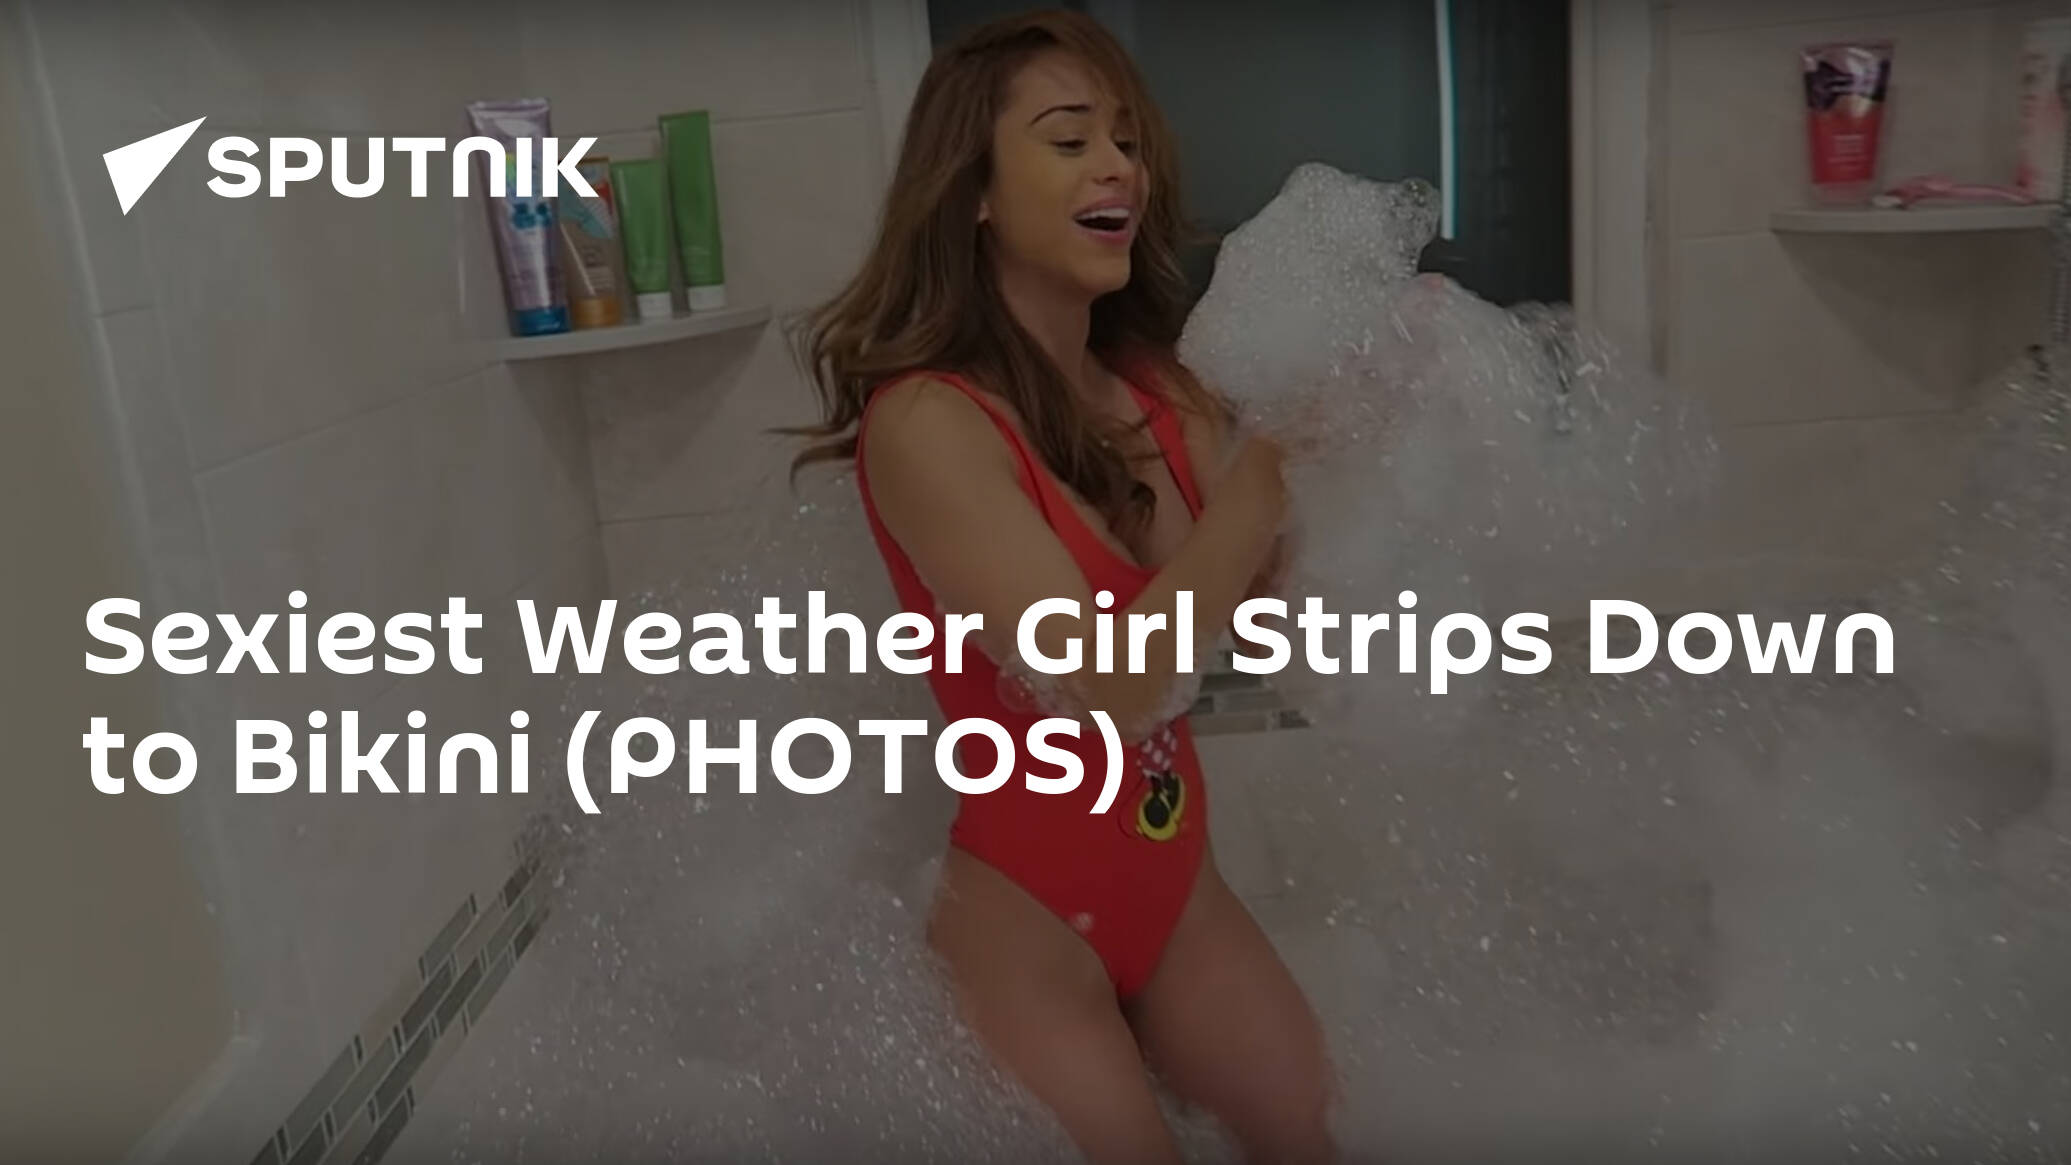 deb fortier recommends Sexy Weather Girl Strips